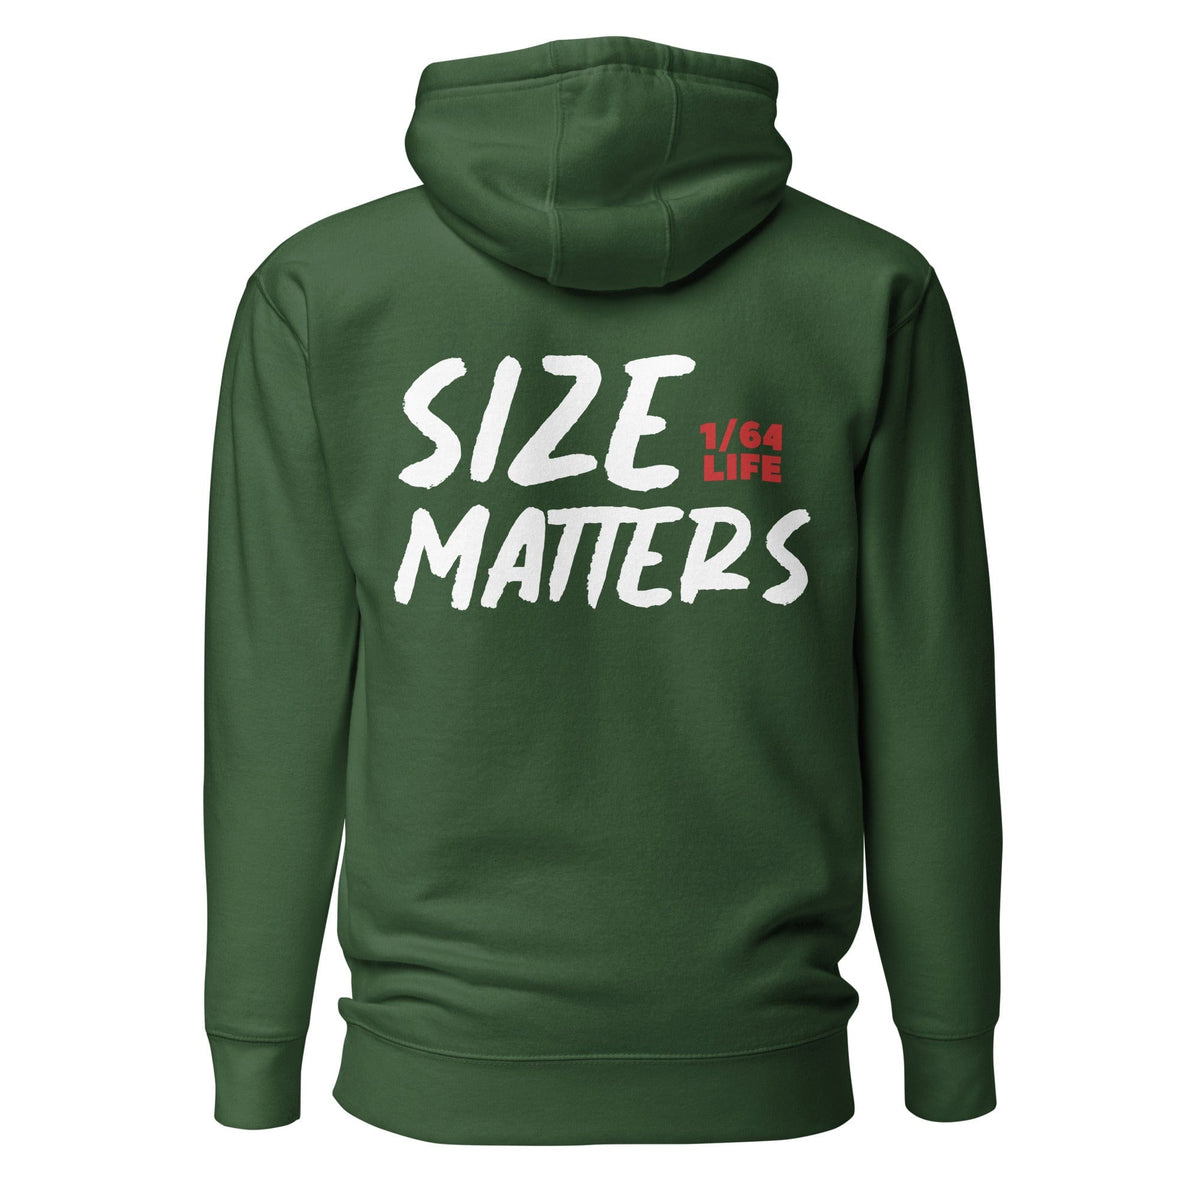 Size Matters Hoodie - 1/64 Life diecast collector clothing